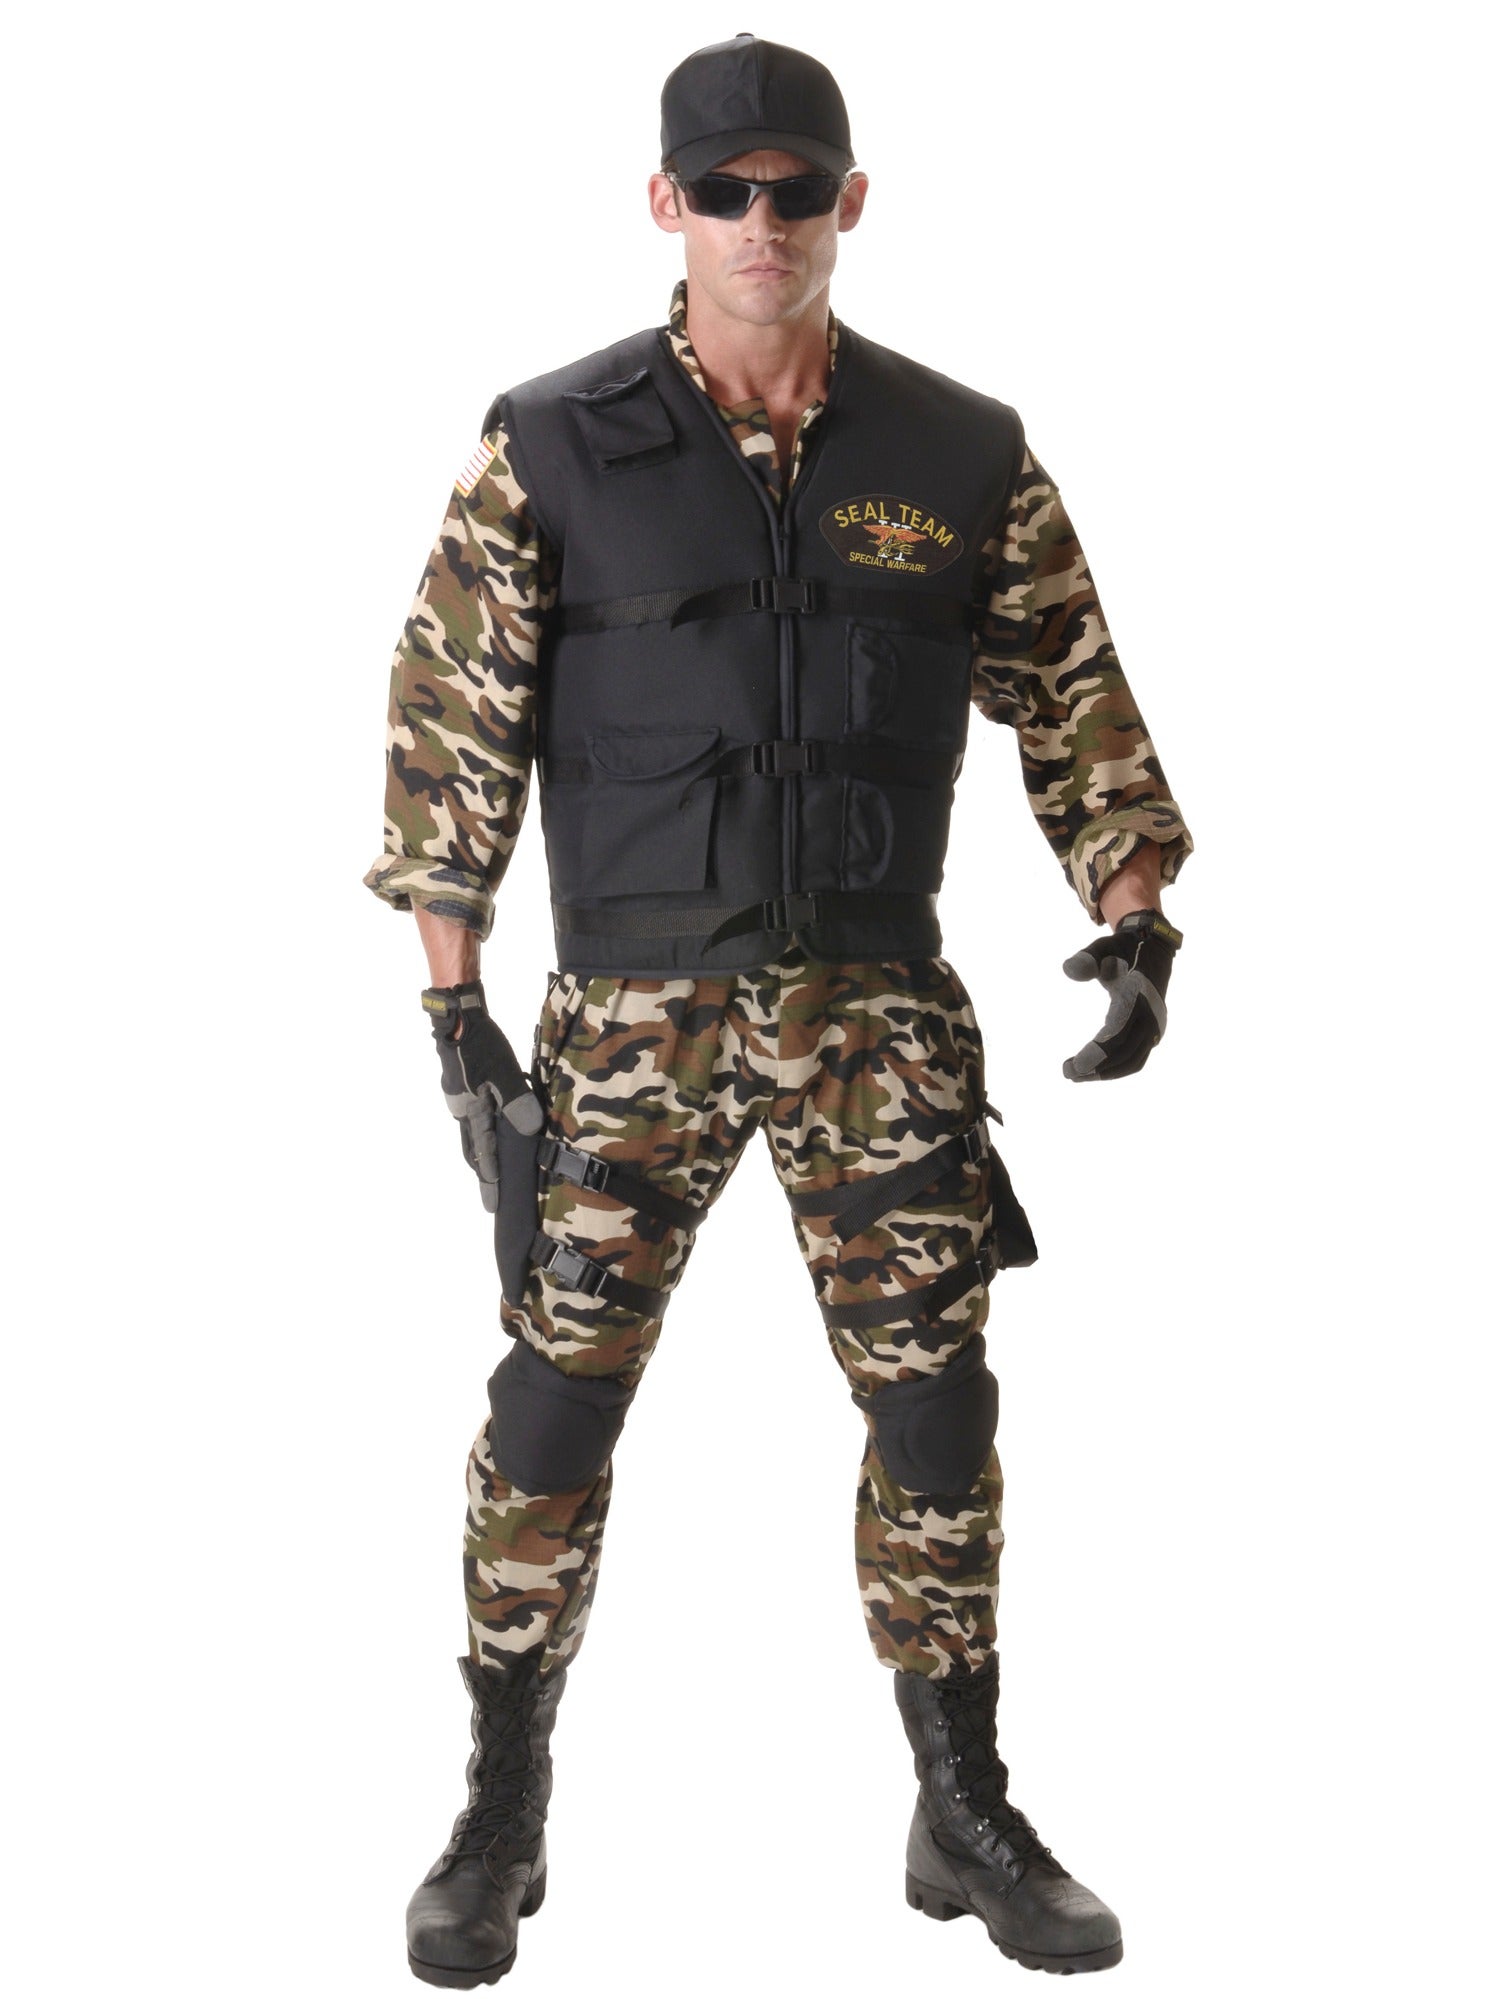 Hobbypos Seal Team Deluxe Military Army Soldier Police Combat Uniform Mens Costume